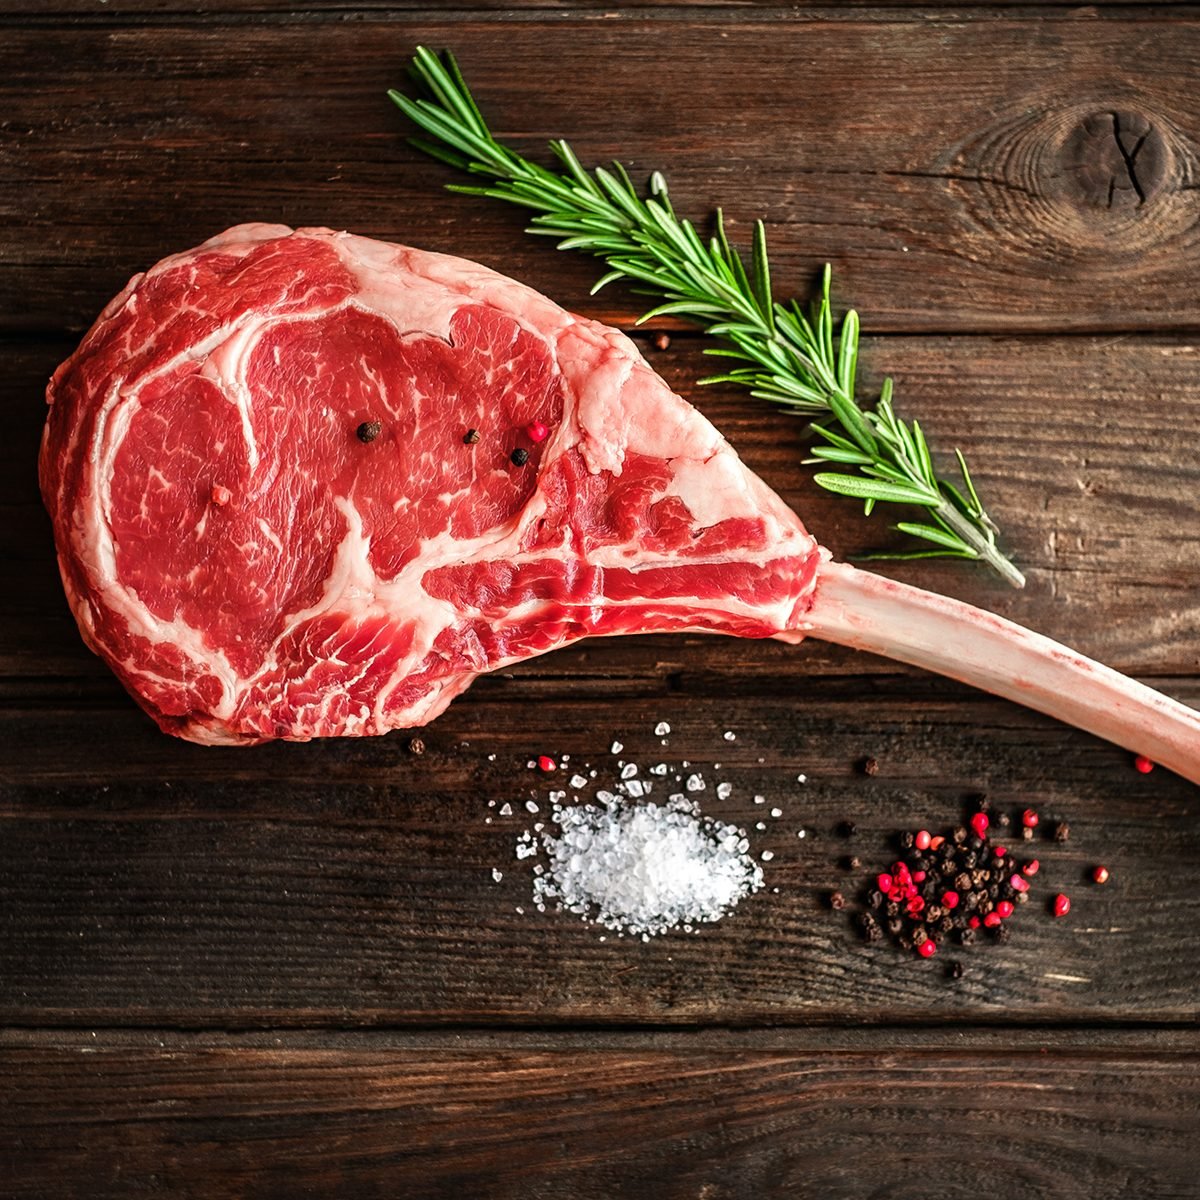 The 5 most expensive beef cuts in the world